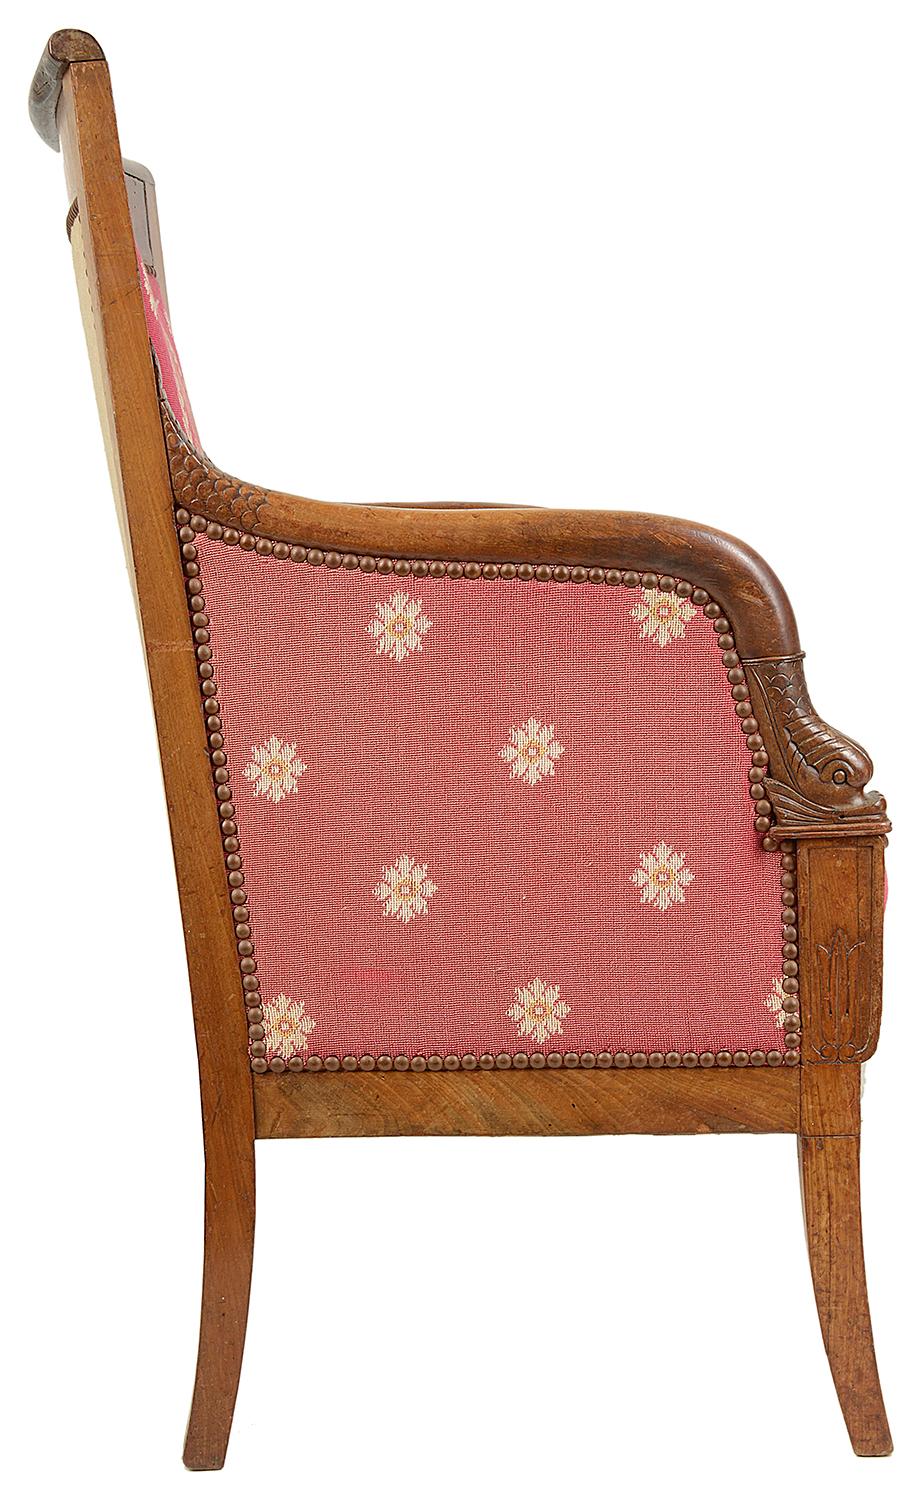 Matched Pair of French Empire Armchairs, 19th Century For Sale 7